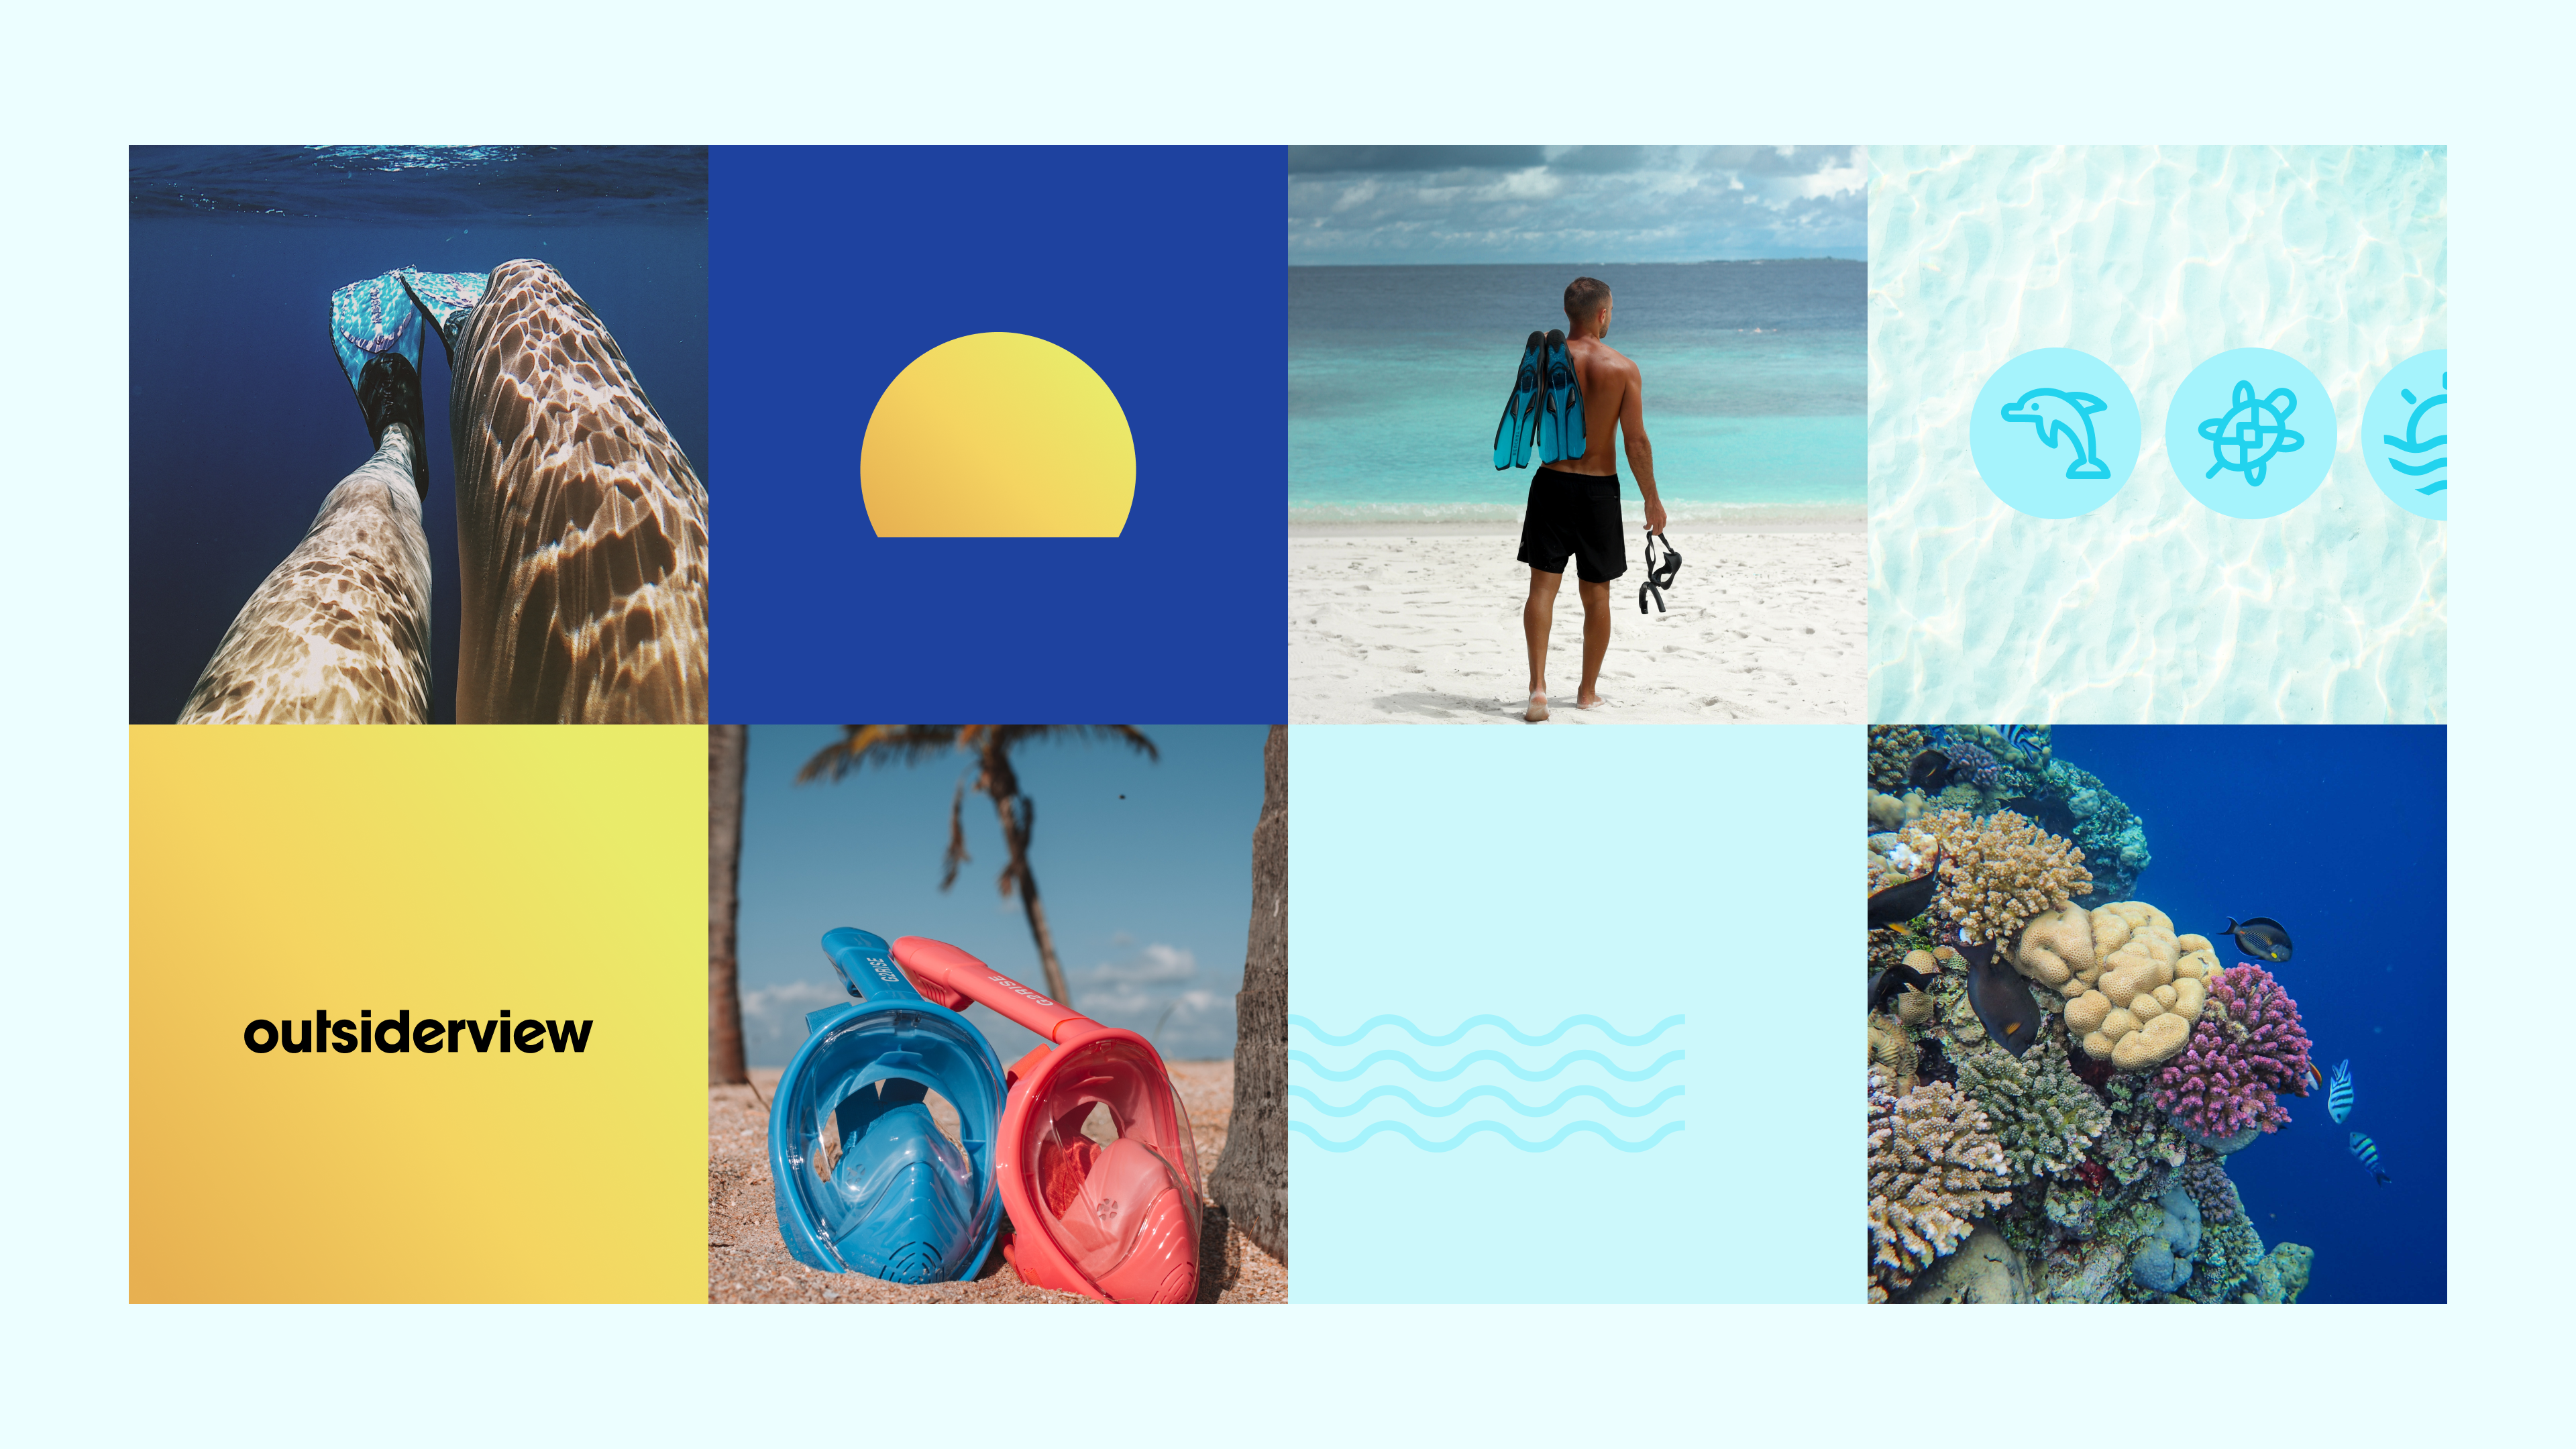 A grid of curated lifestyle photos and key visuals showing off the fun and sporty OutsiderView visual identity system.